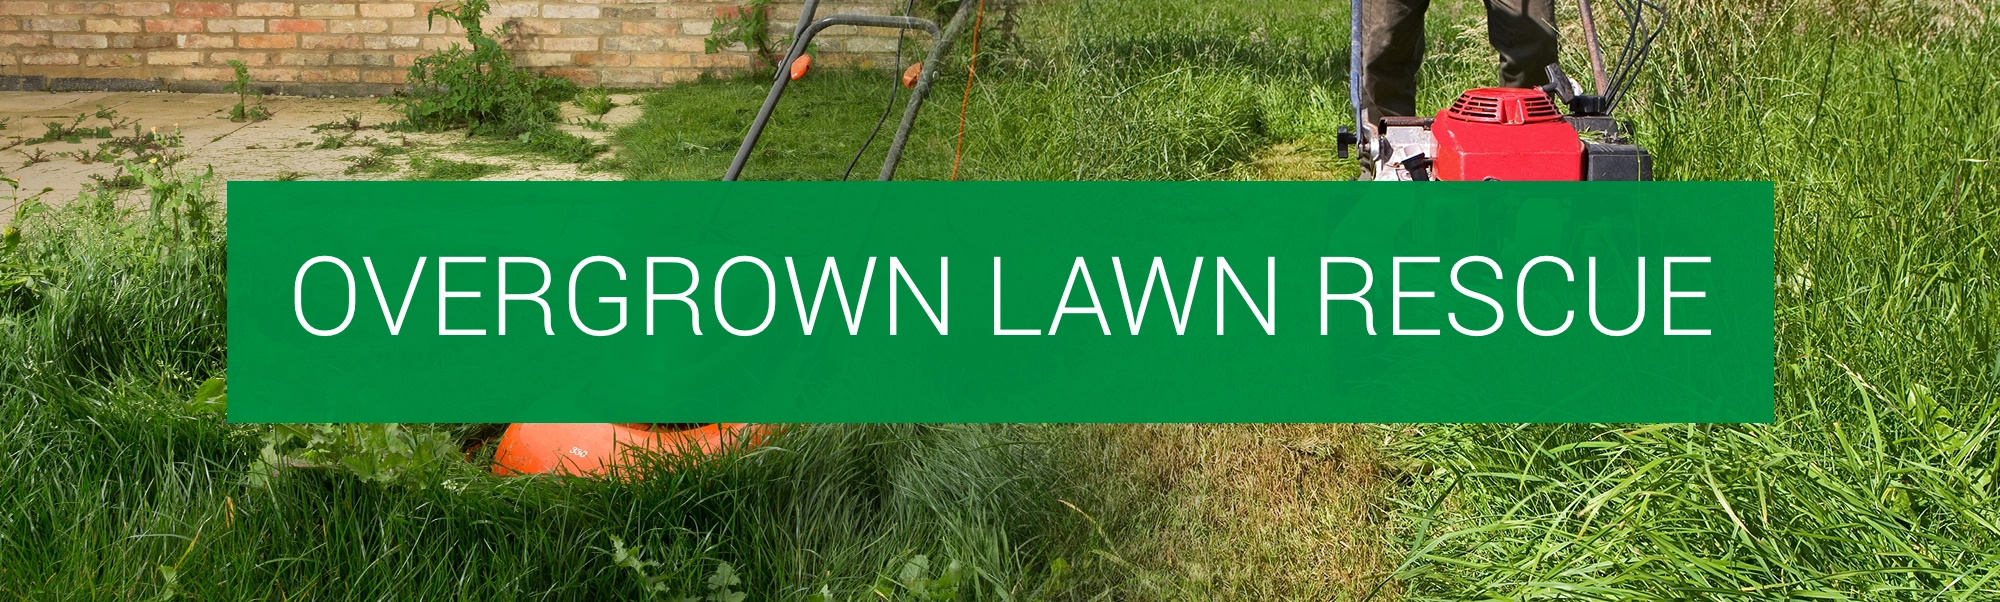 Lawn Care Services in Oklahoma - Overgrown Lawn Rescue